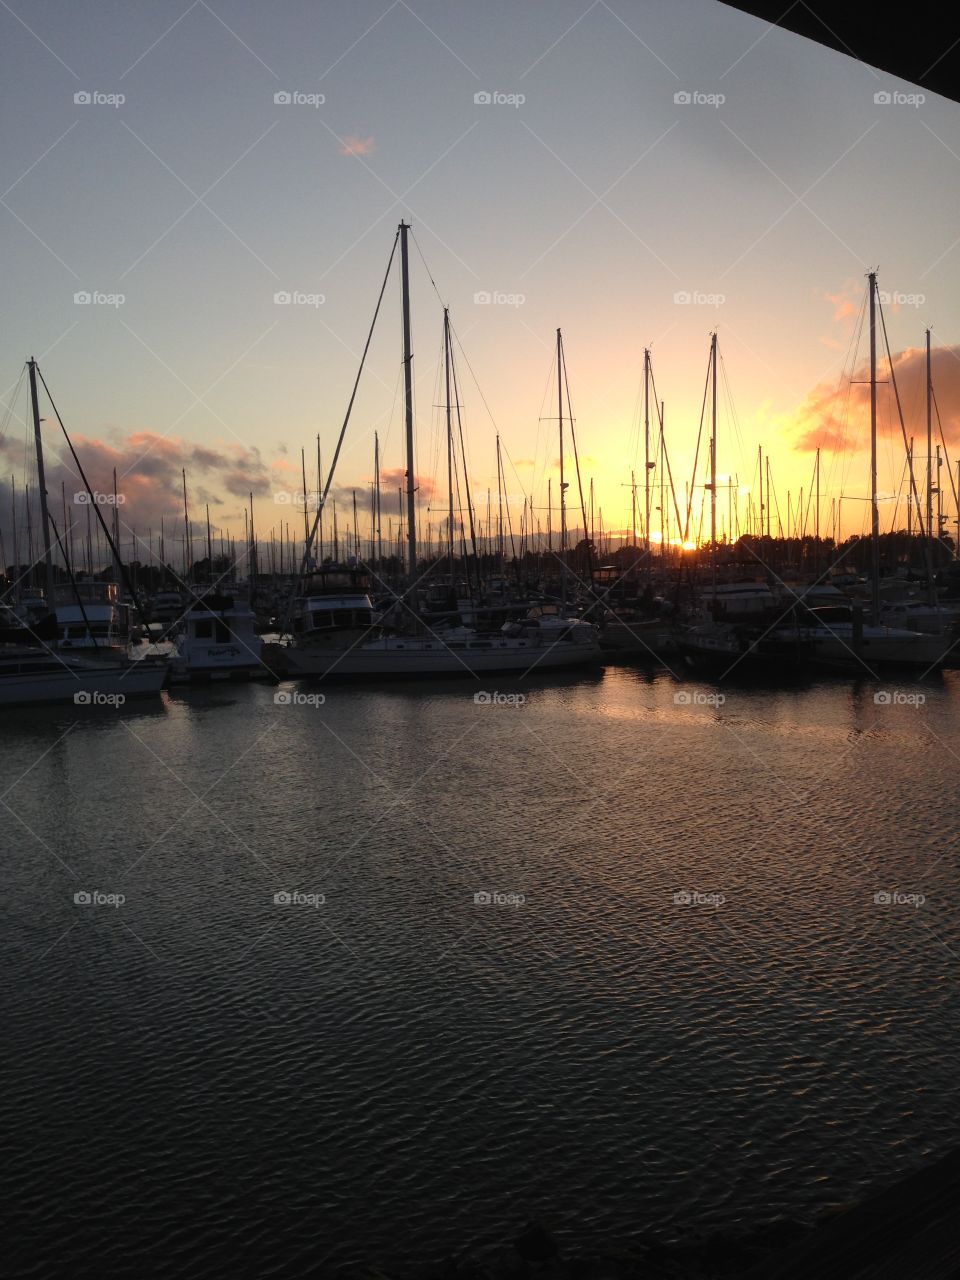 Sailboats in the harbor at sunset 